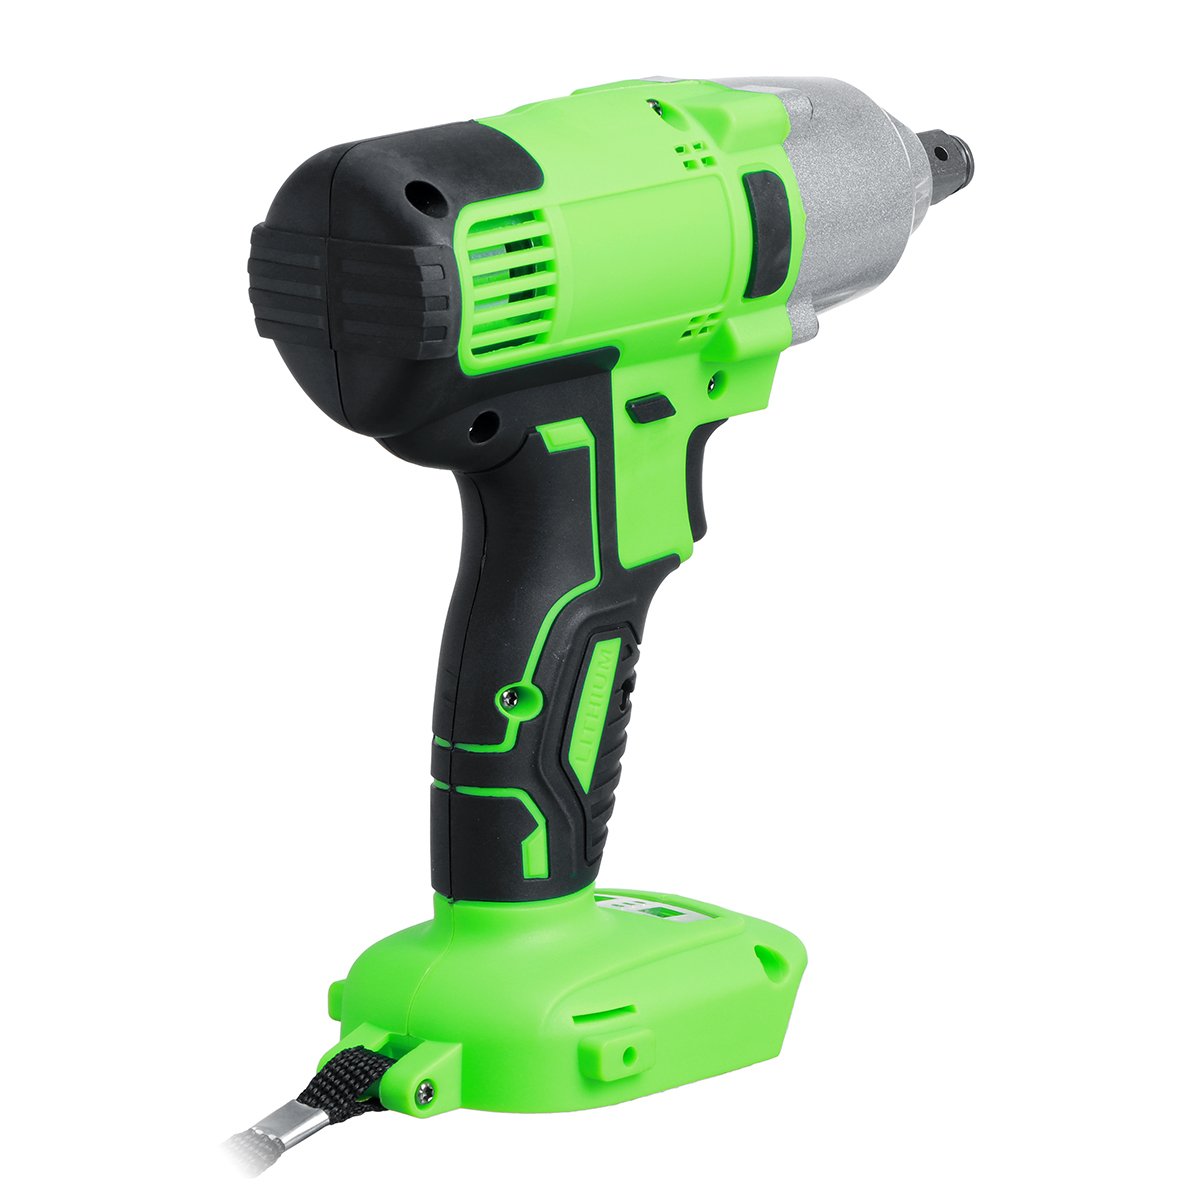 650NM-1600W-Brushless-Cordless-Electric-Drill-Screwdriver-For-Makita-18V-Battety-1783492-7